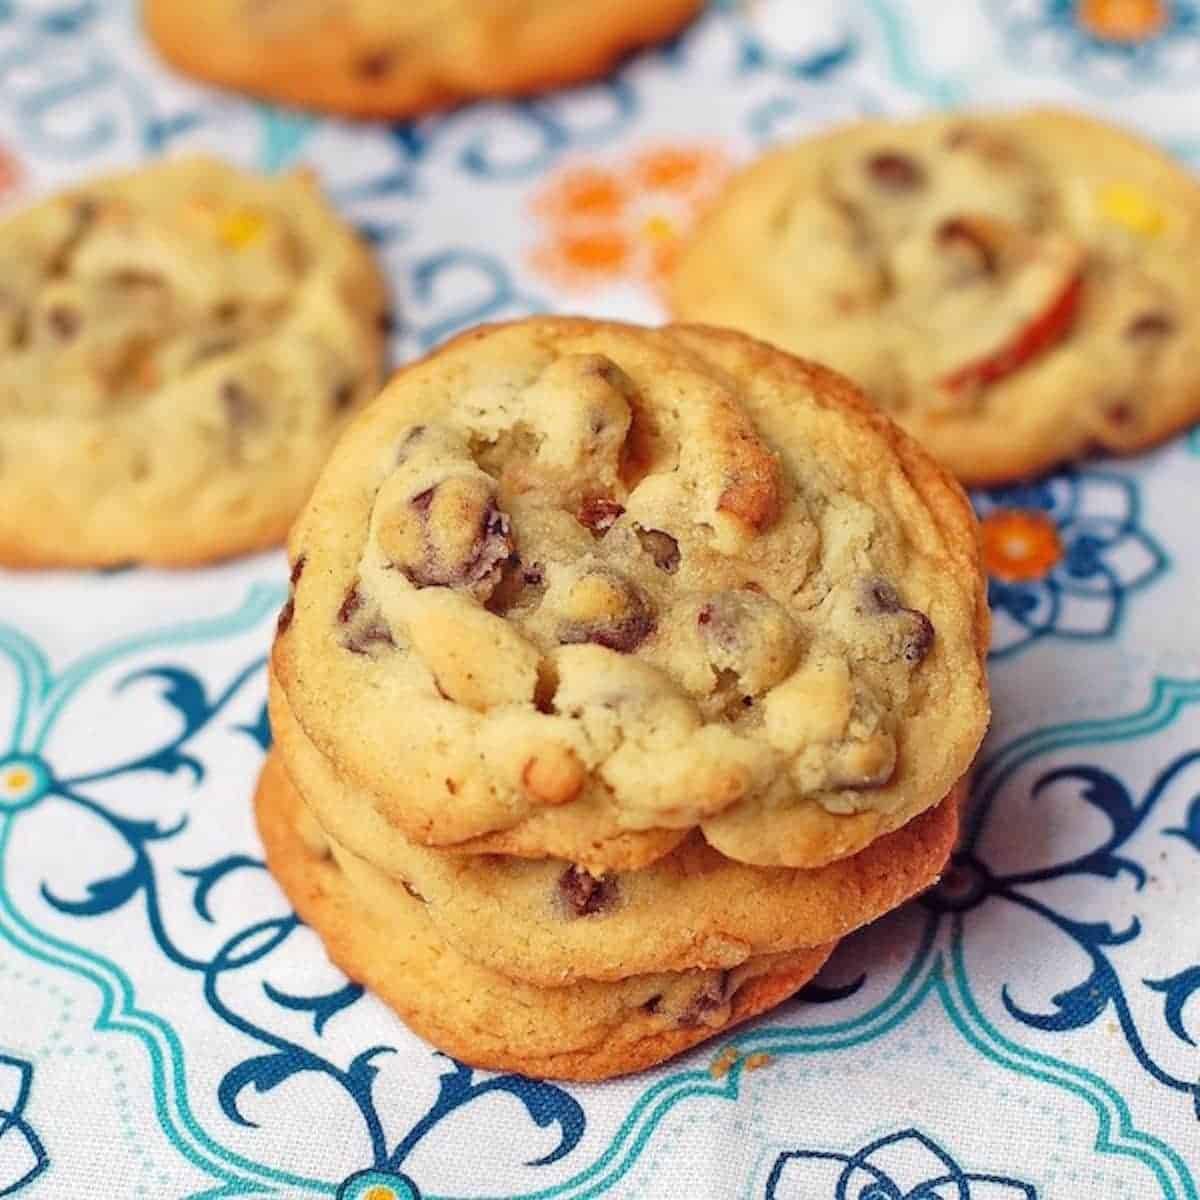 Peanut butter pretzel cookies on a colorful piece of fabric.